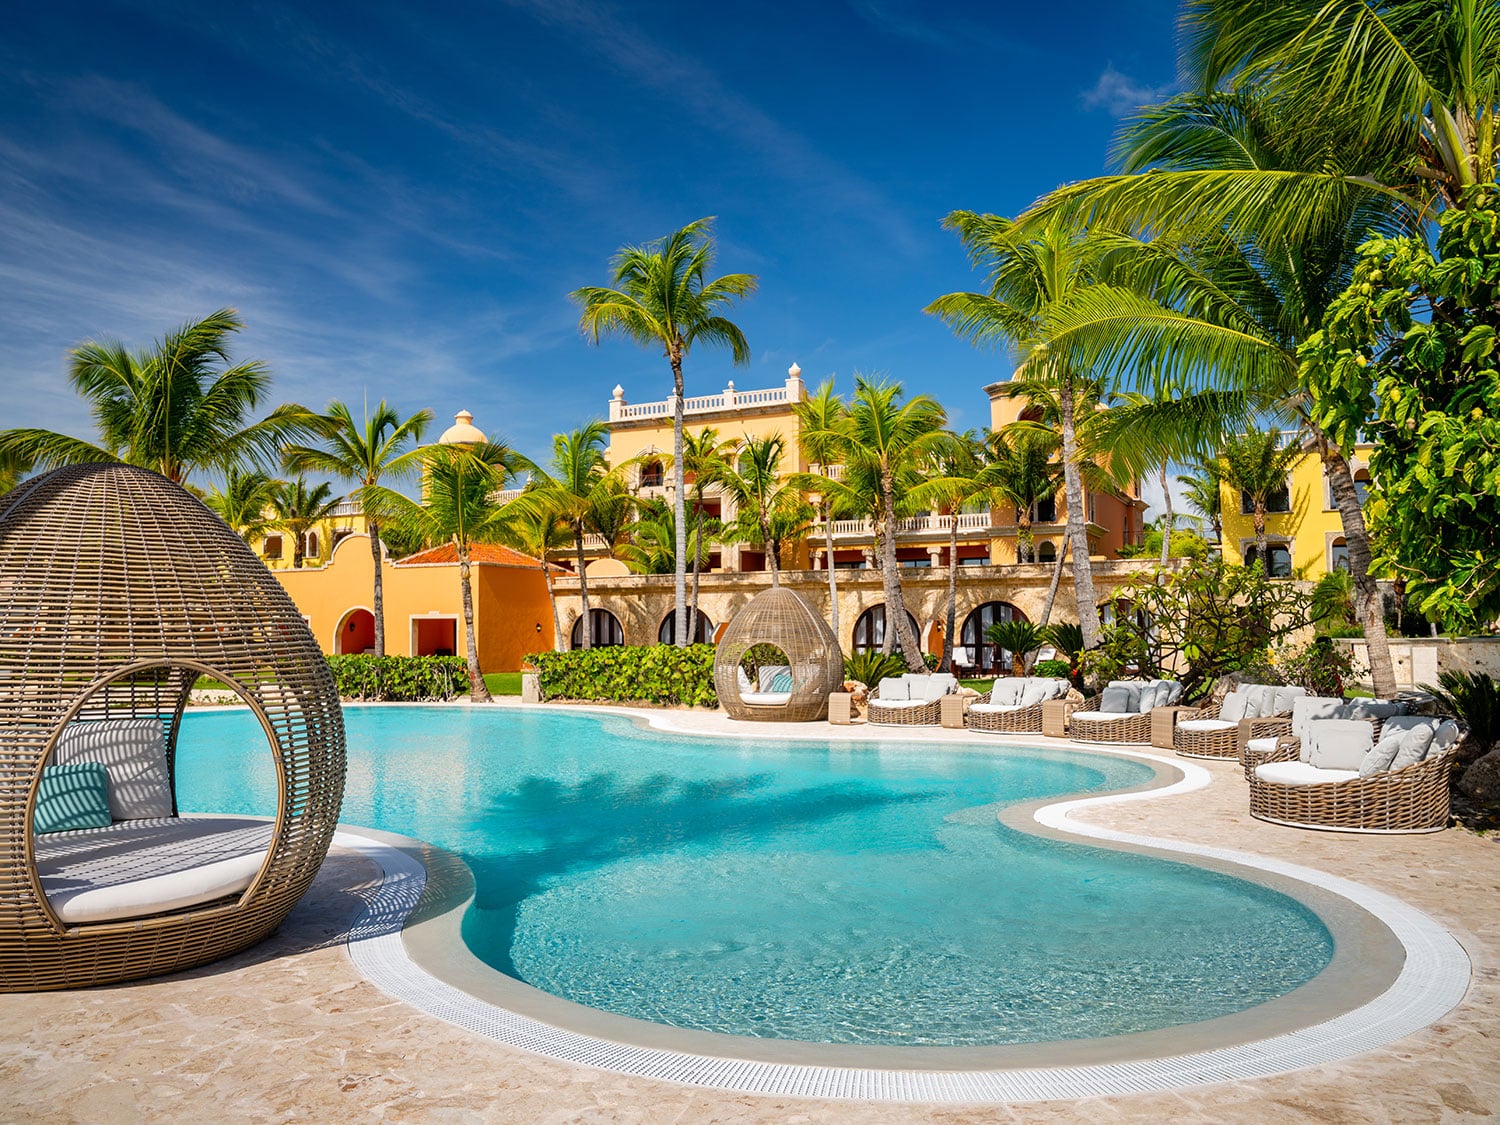 The pool area at Sanctuary Cap Cana, A Luxury Collection Adult All-inclusive Resort, in the Dominican Republic.